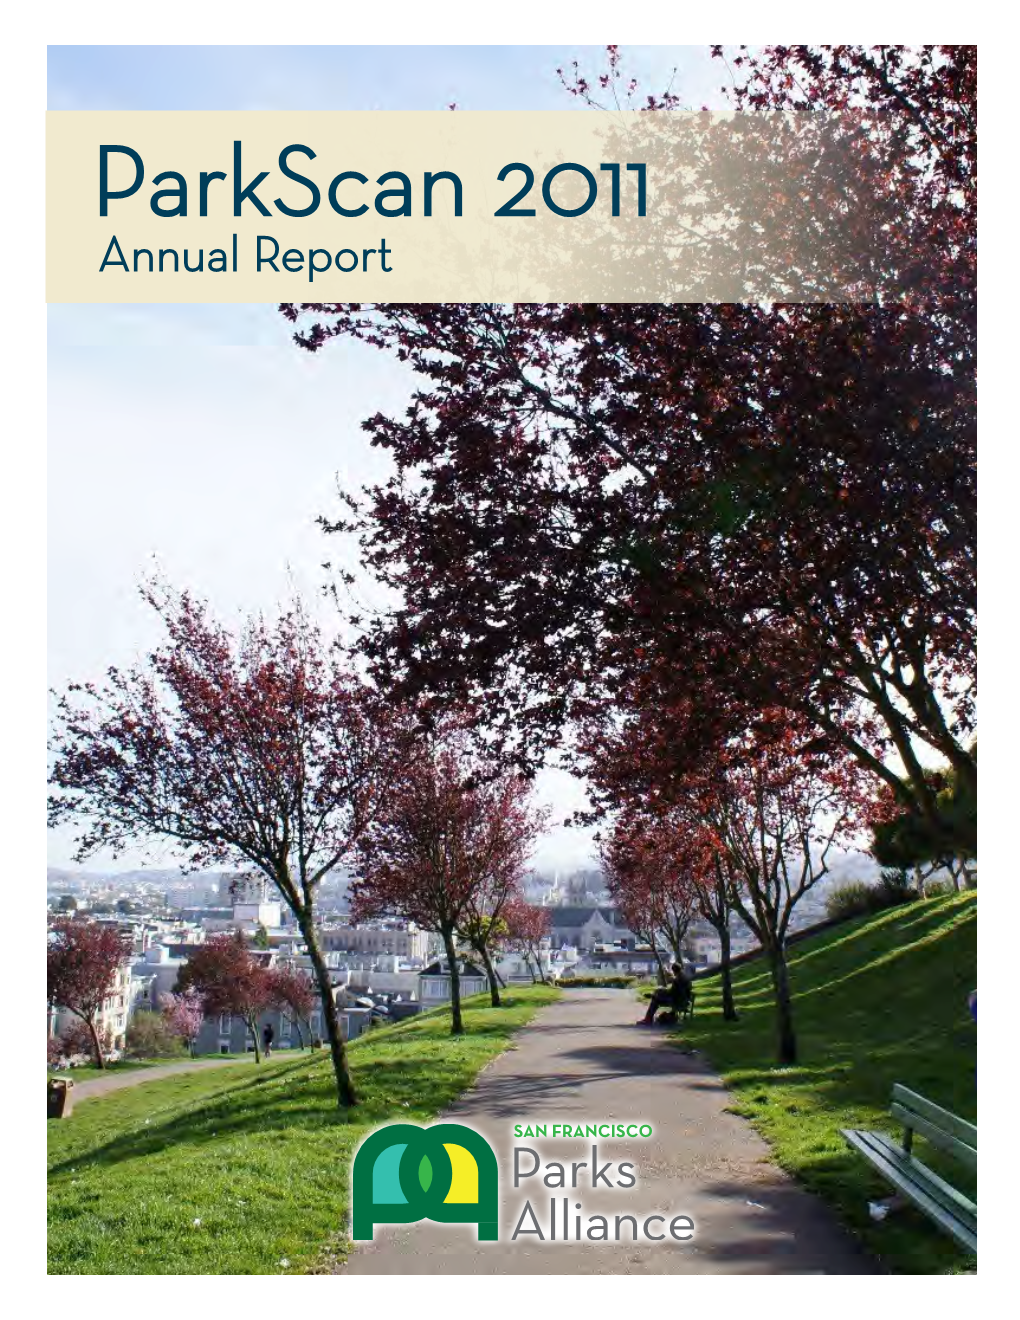 Download the 2011 Parkscan Report Here